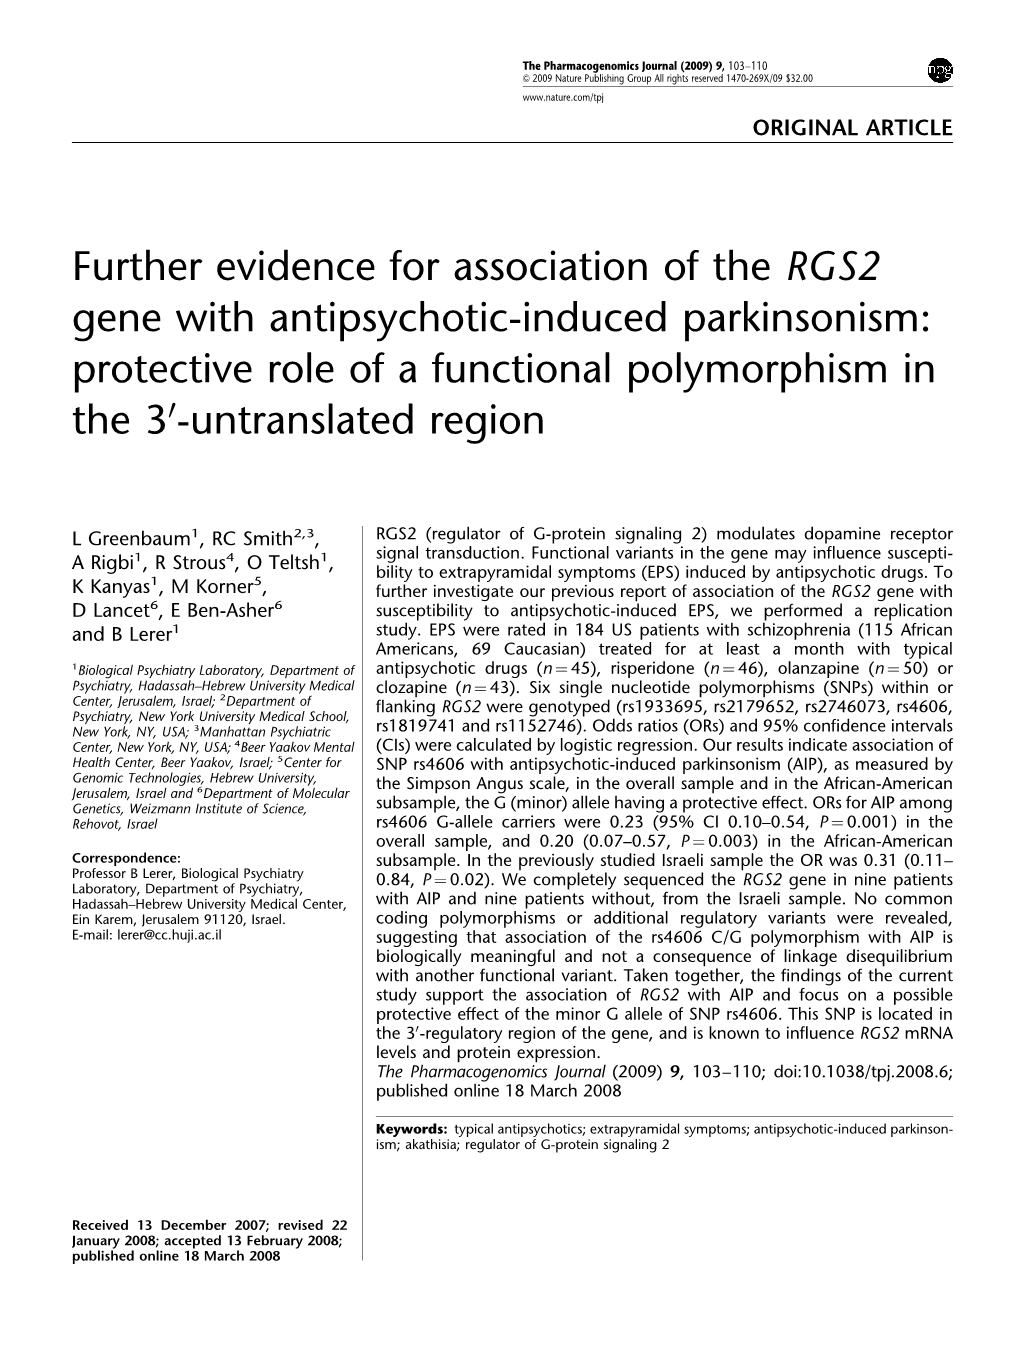 Further Evidence for Association of the RGS2 Gene with Antipsychotic-Induced Parkinsonism: Protective Role of a Functional Polymorphism in the 30-Untranslated Region